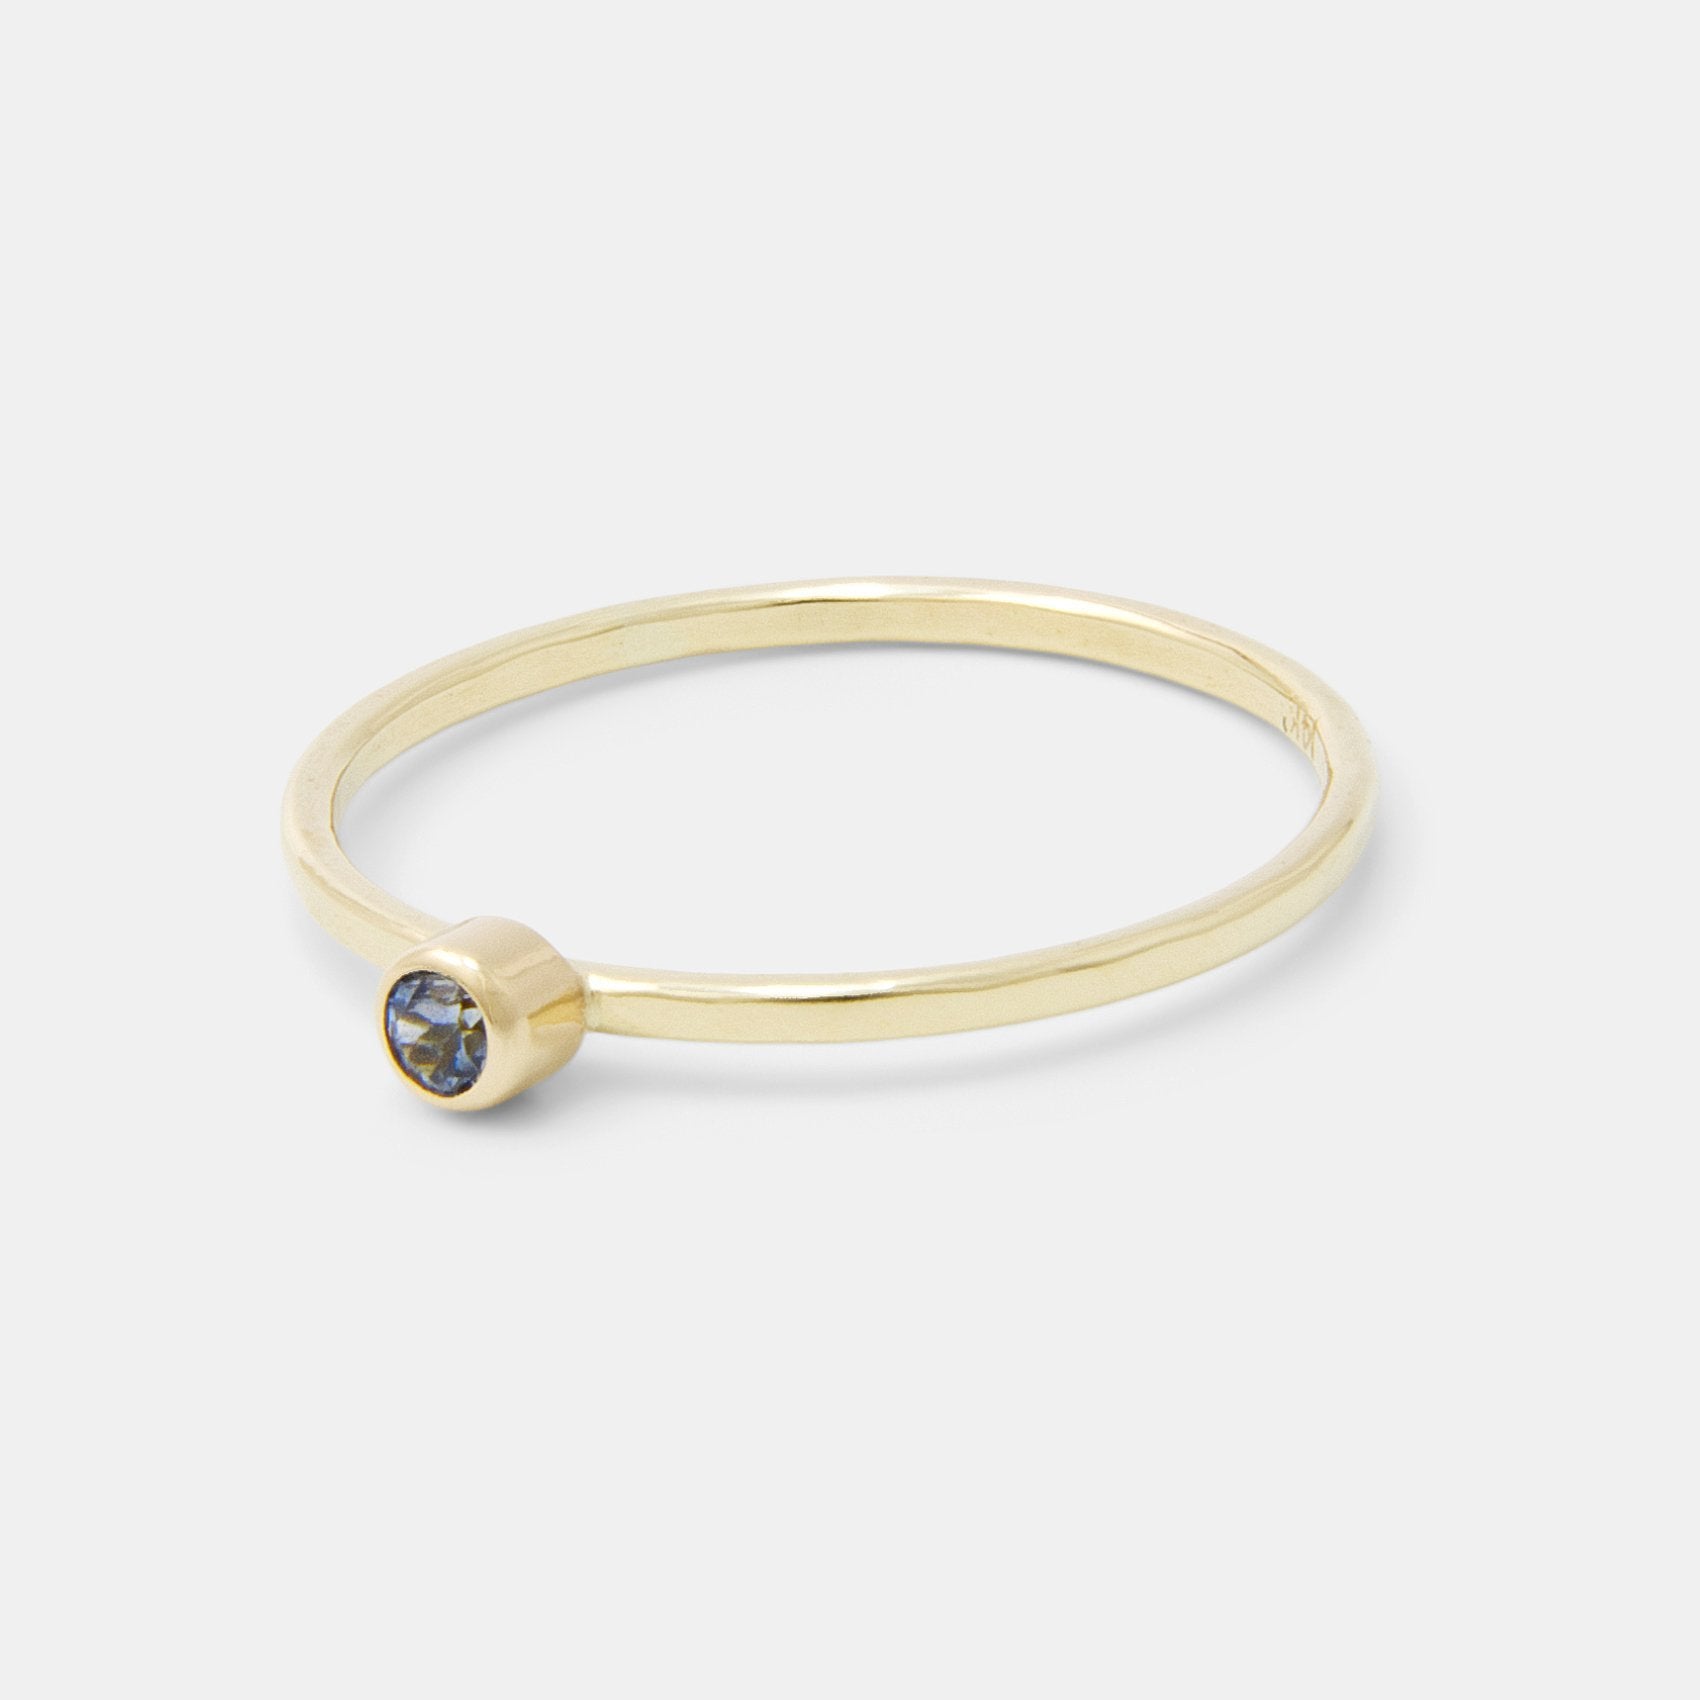 Montana sapphire & solid gold stacking ring - Simone Walsh Jewellery Australia